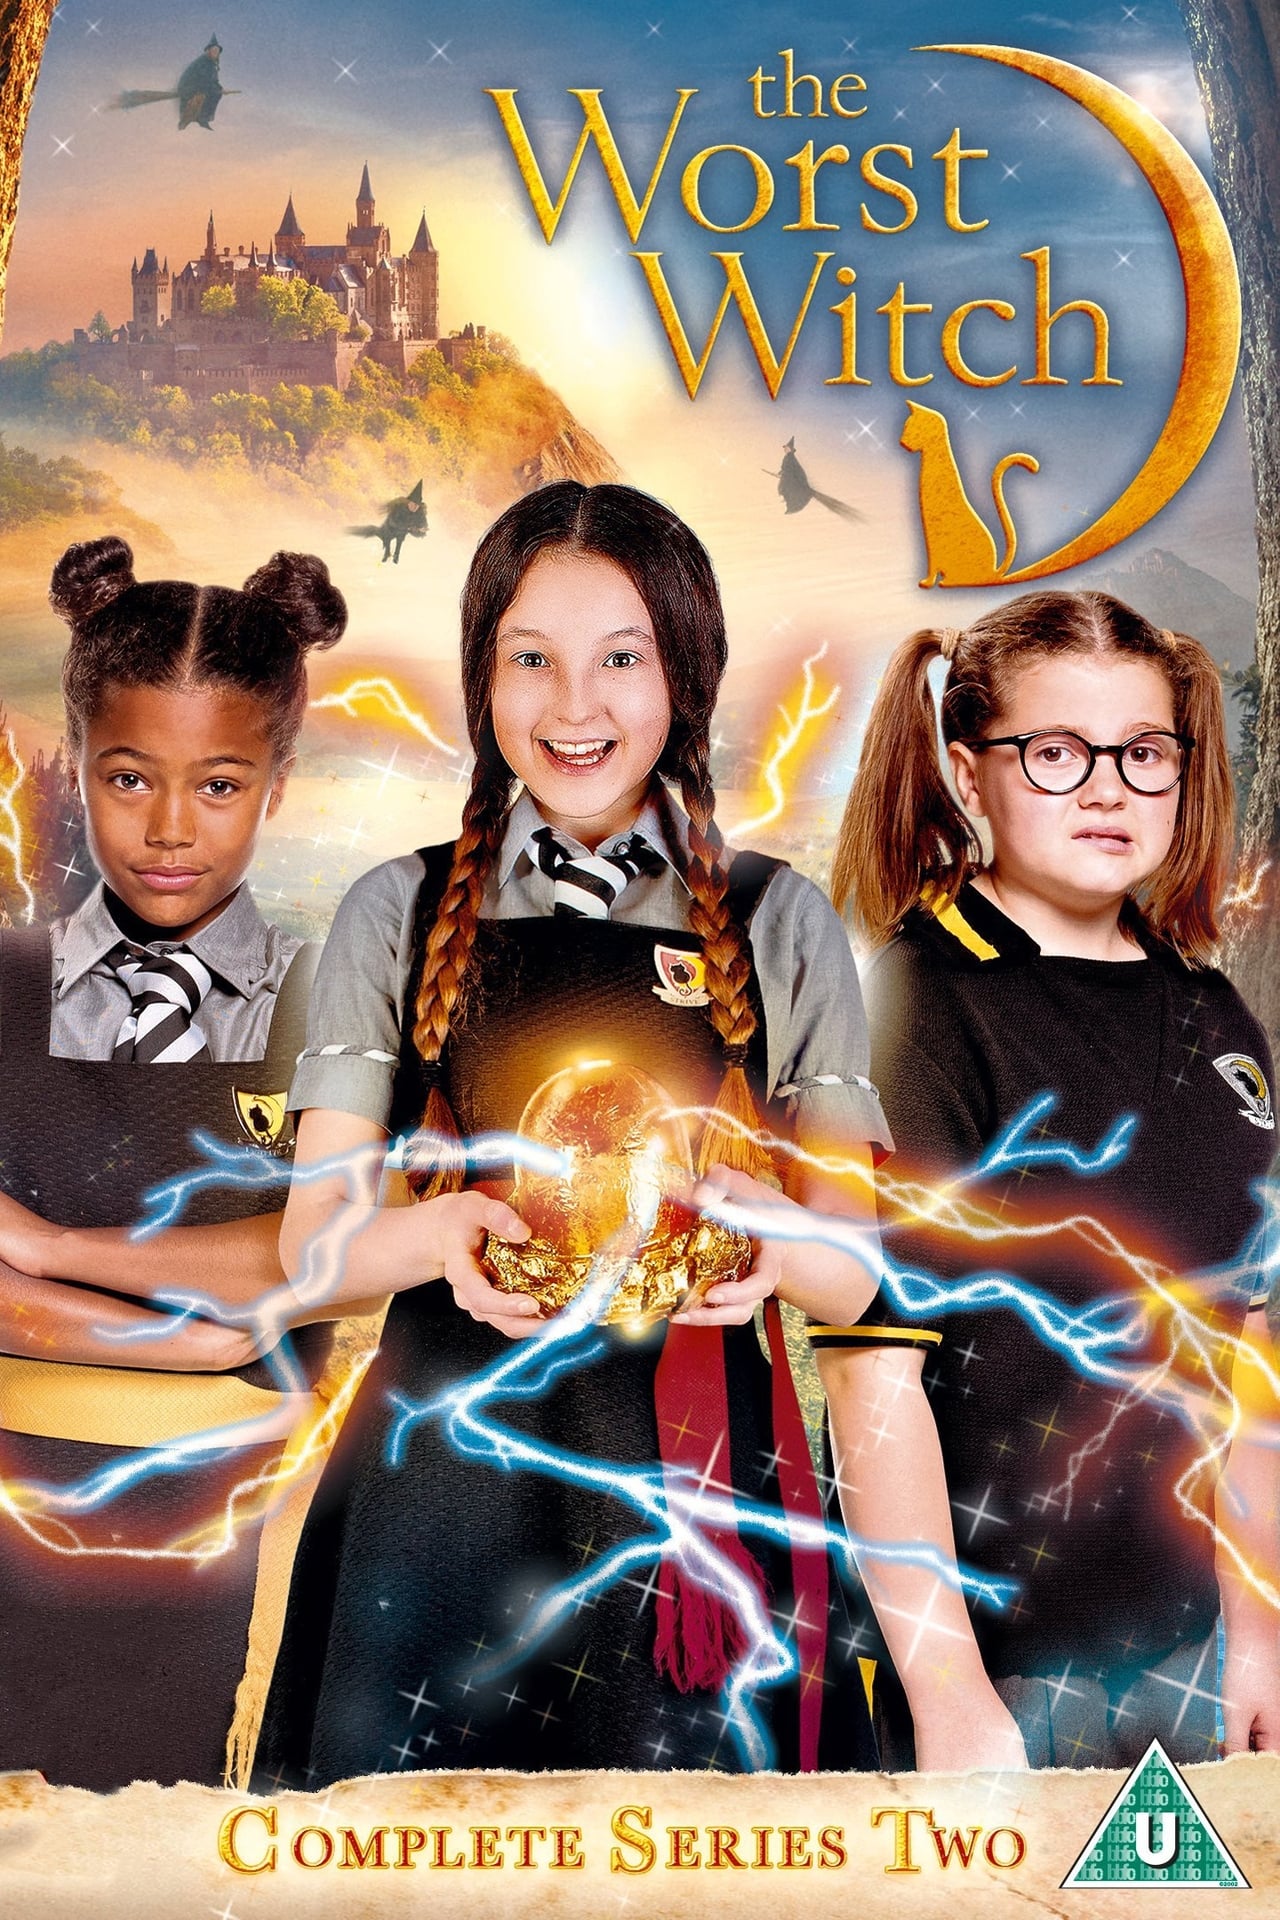 The Worst Witch (2018)